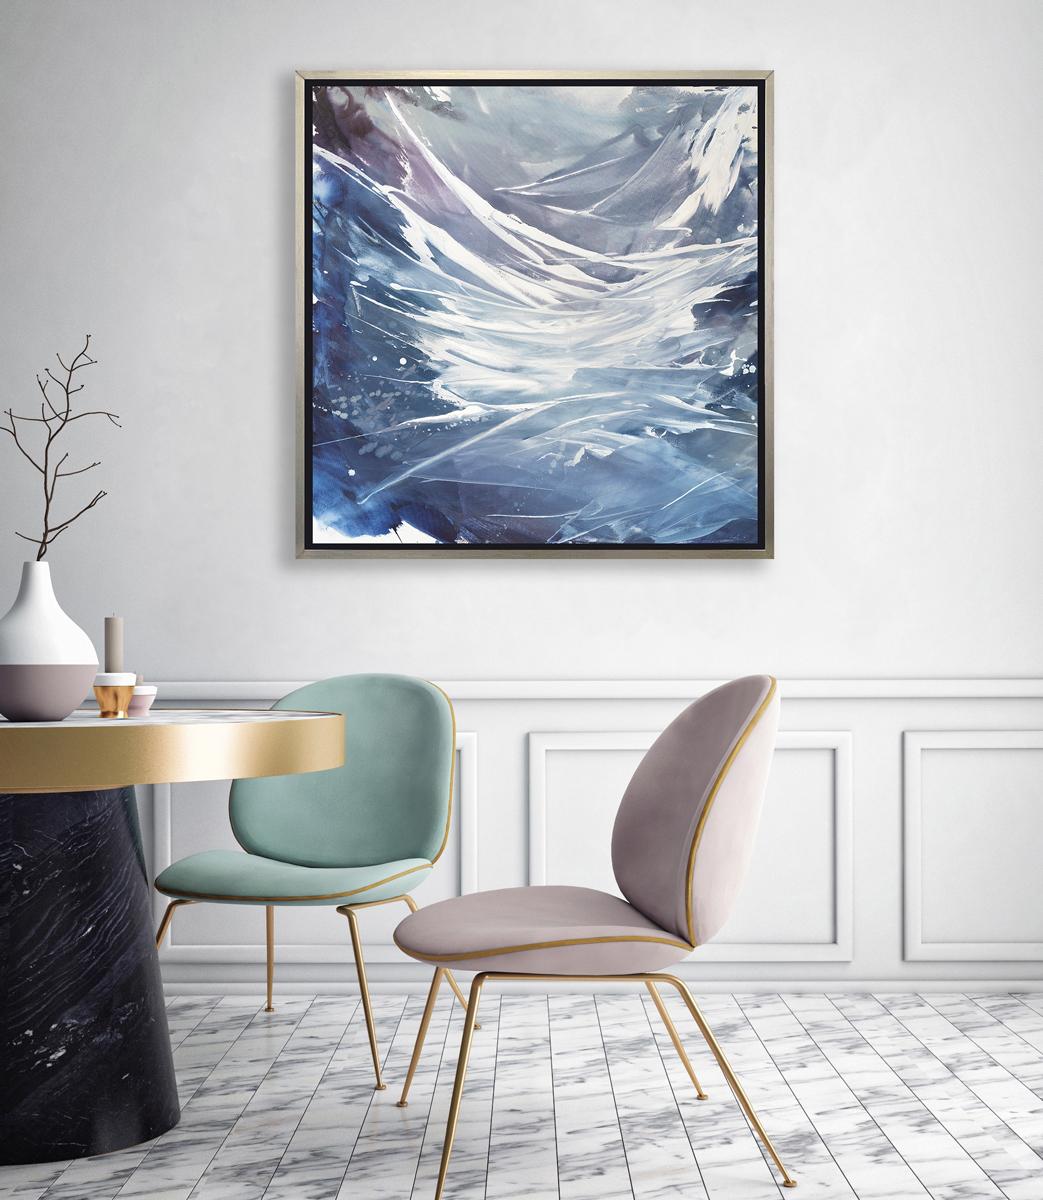 This contemporary abstract limited edition print by Teodora Guererra features a cool palette, with layers of washes of blue, grey, violet and and white applied in sweeping gestures across the piece.

This Limited Edition giclee print by Teodora